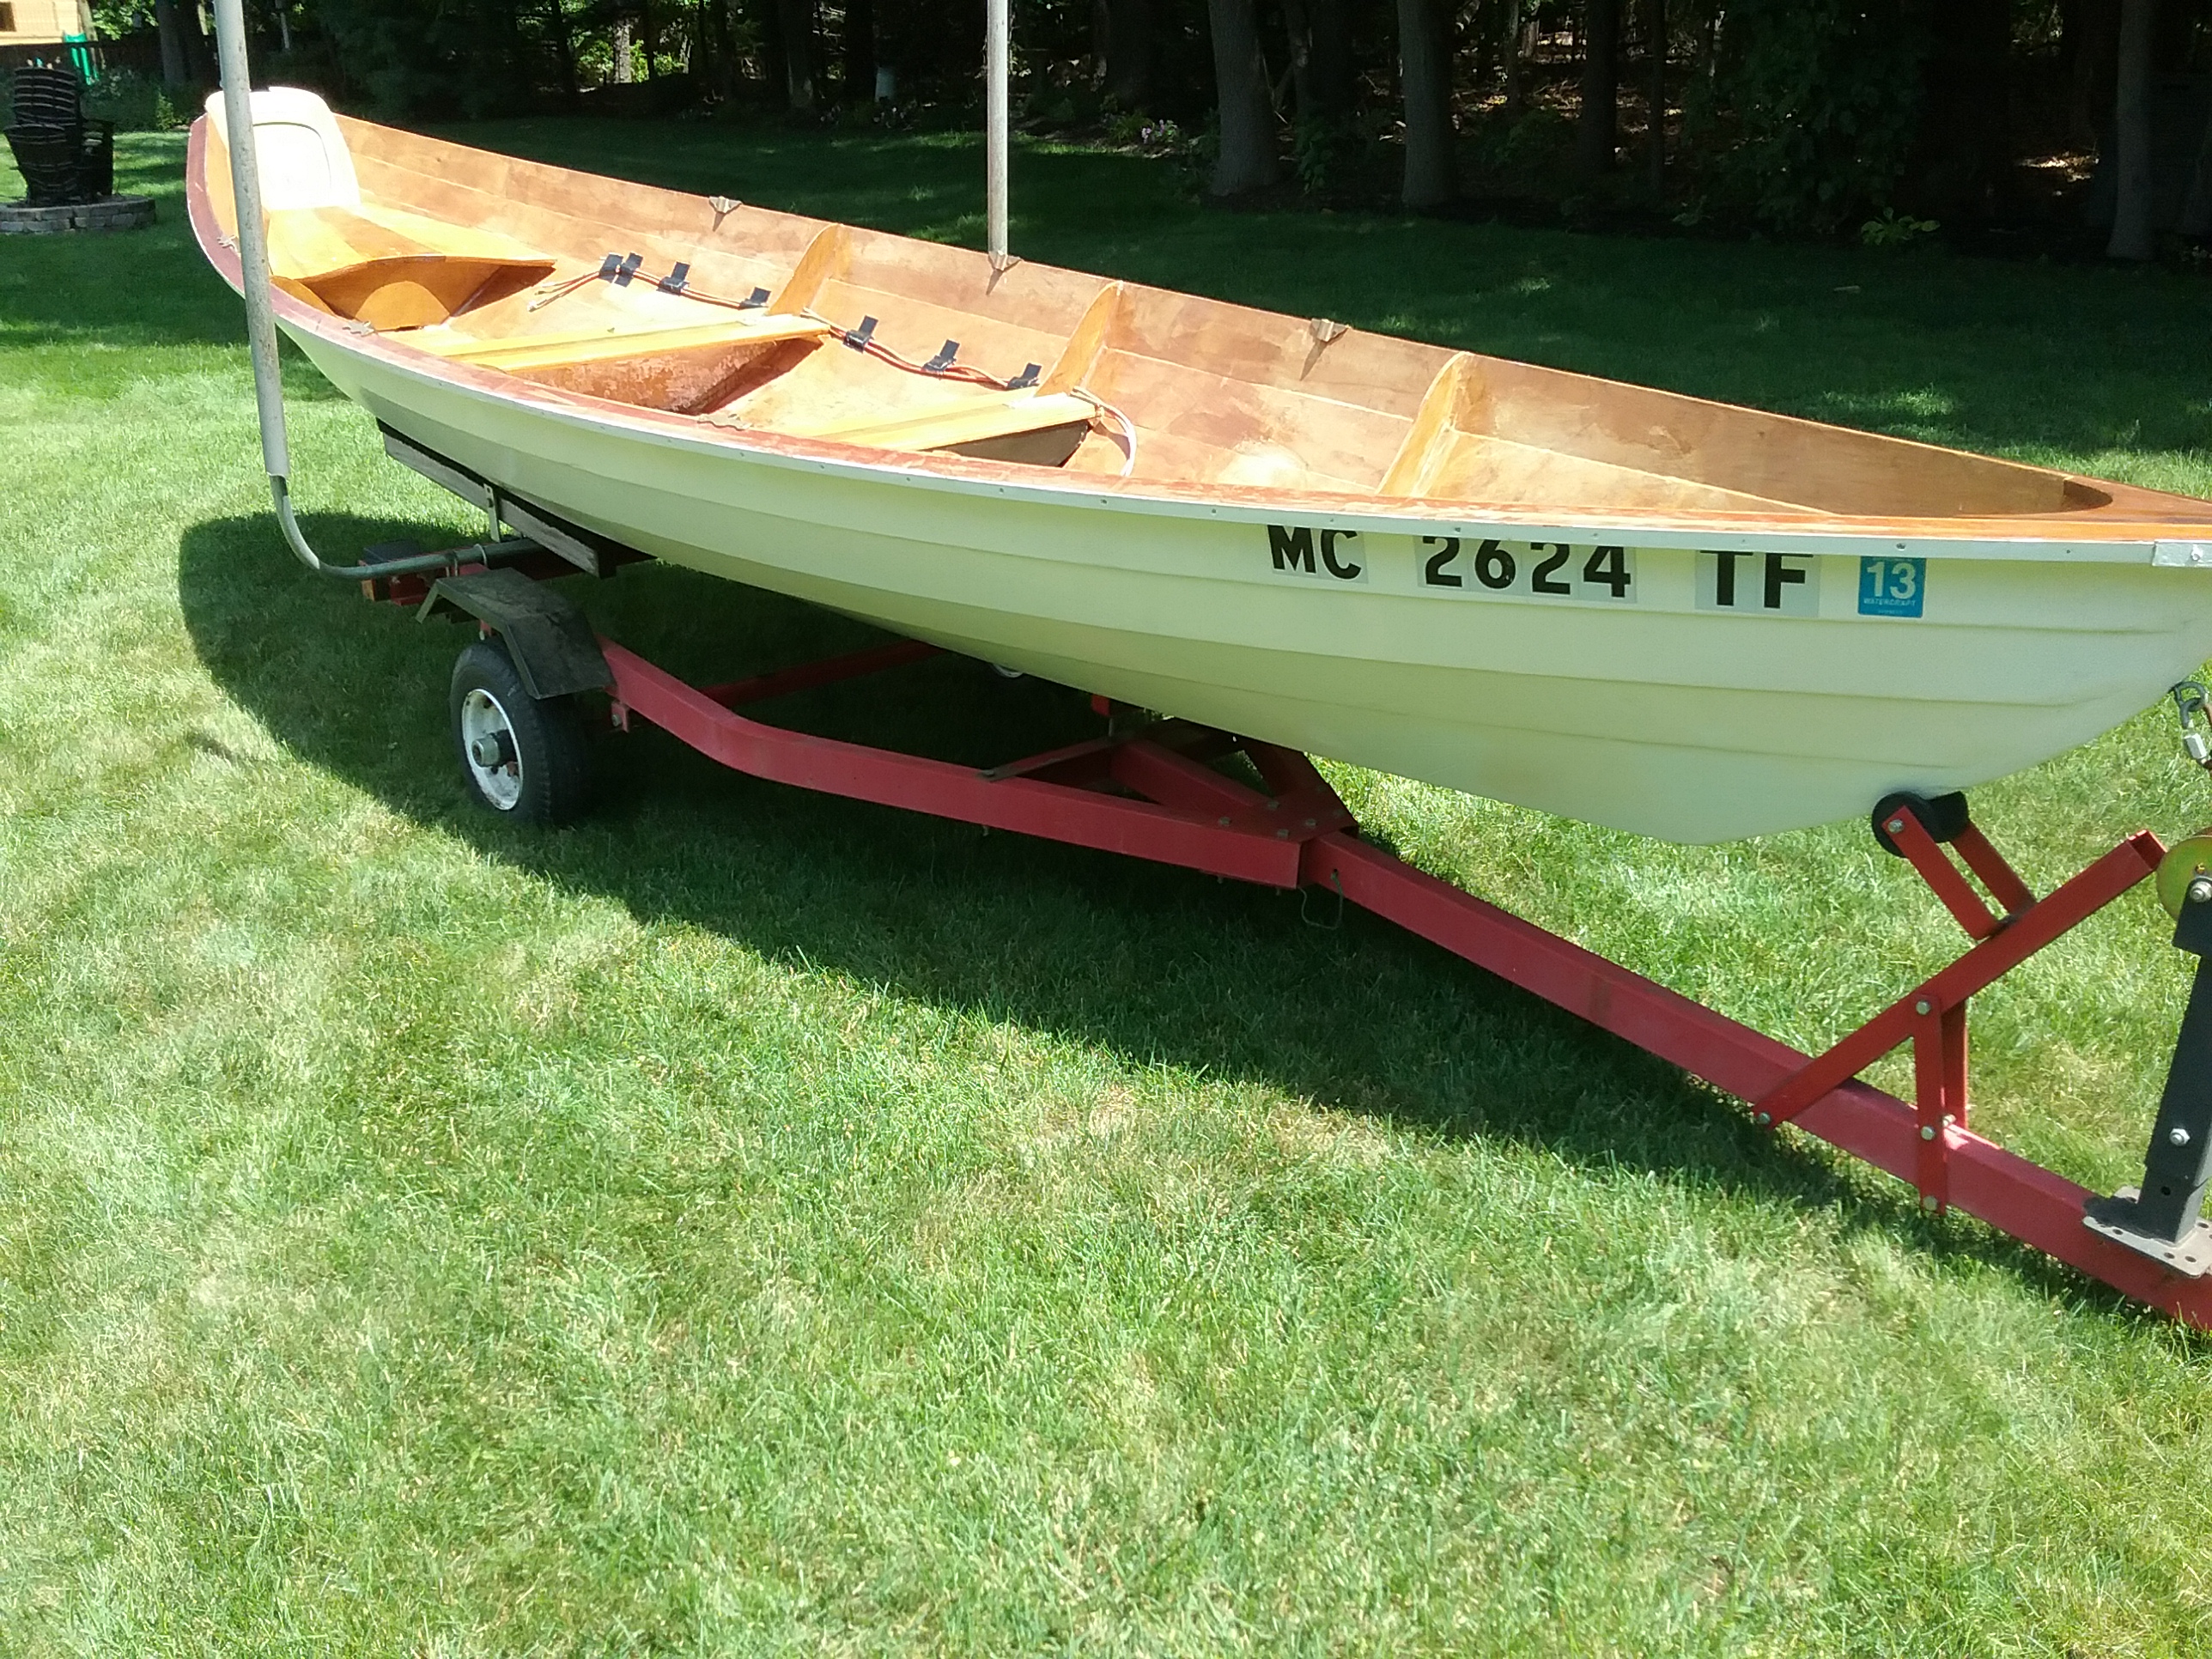 2009 17 foot Chesapeake northeaster dory Rowboat for sale in Grand Haven, MI - image 1 